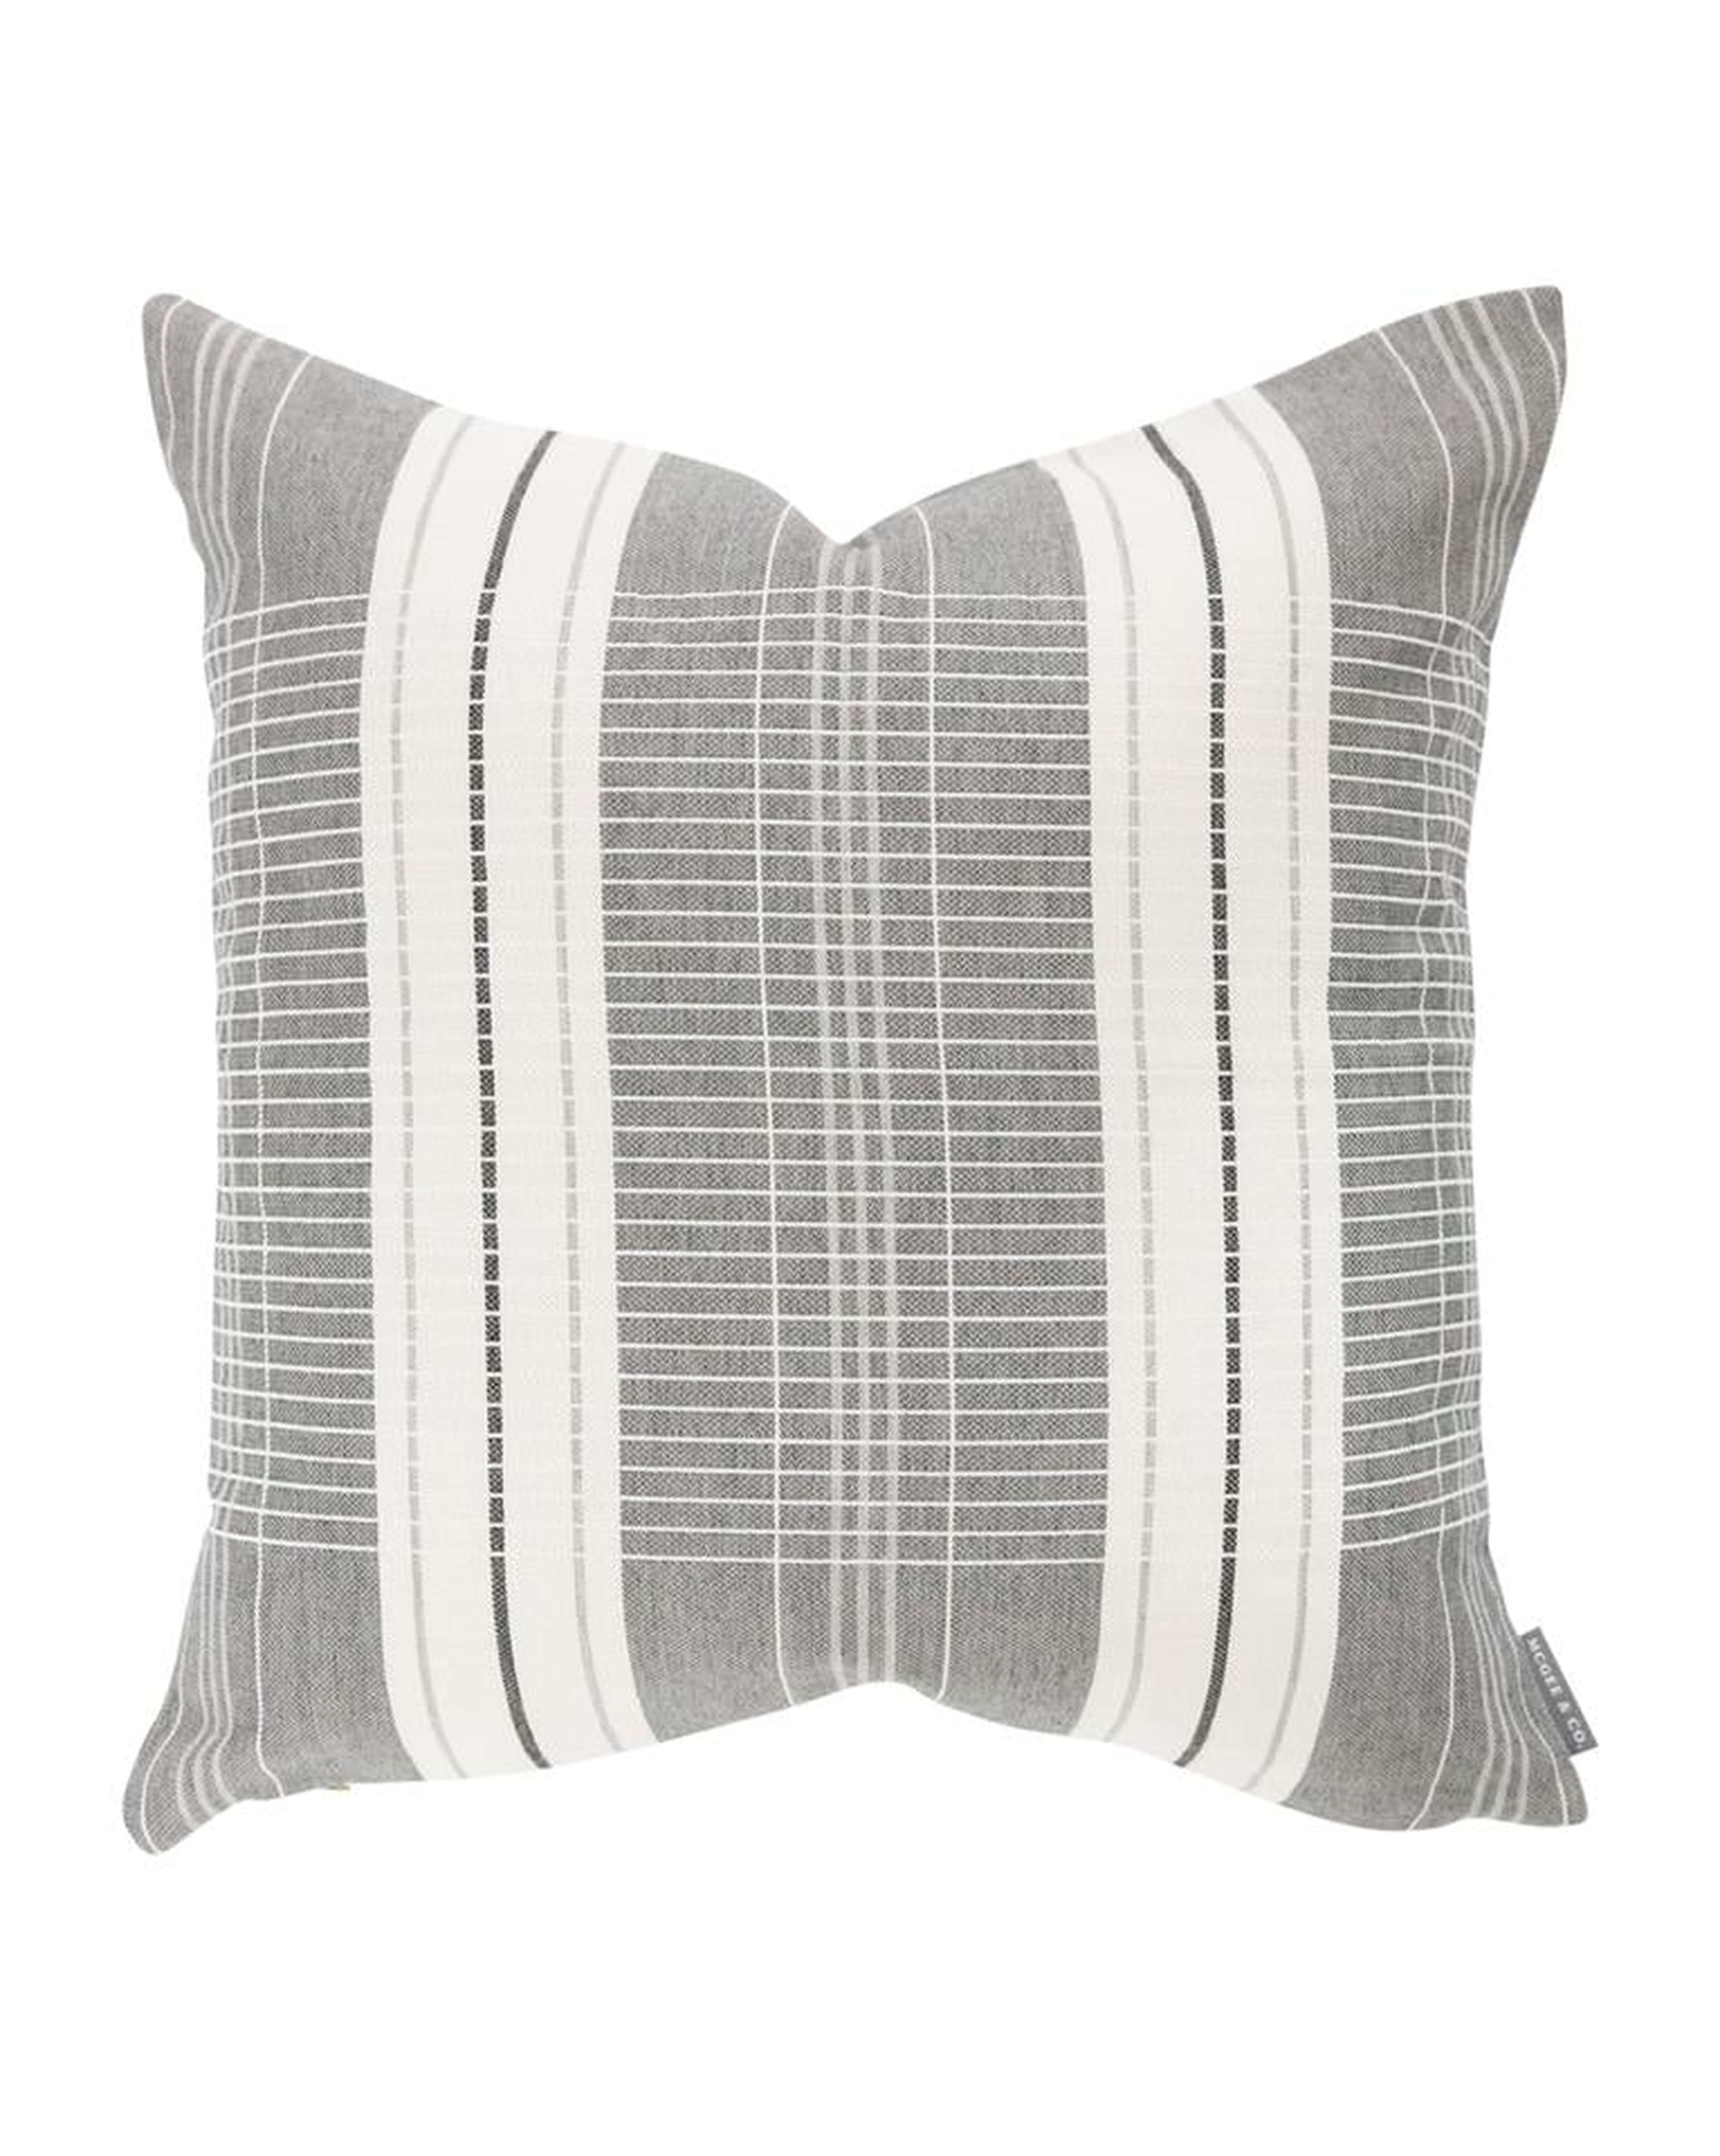 OXFORD WOVEN PLAID PILLOW COVER - McGee & Co.